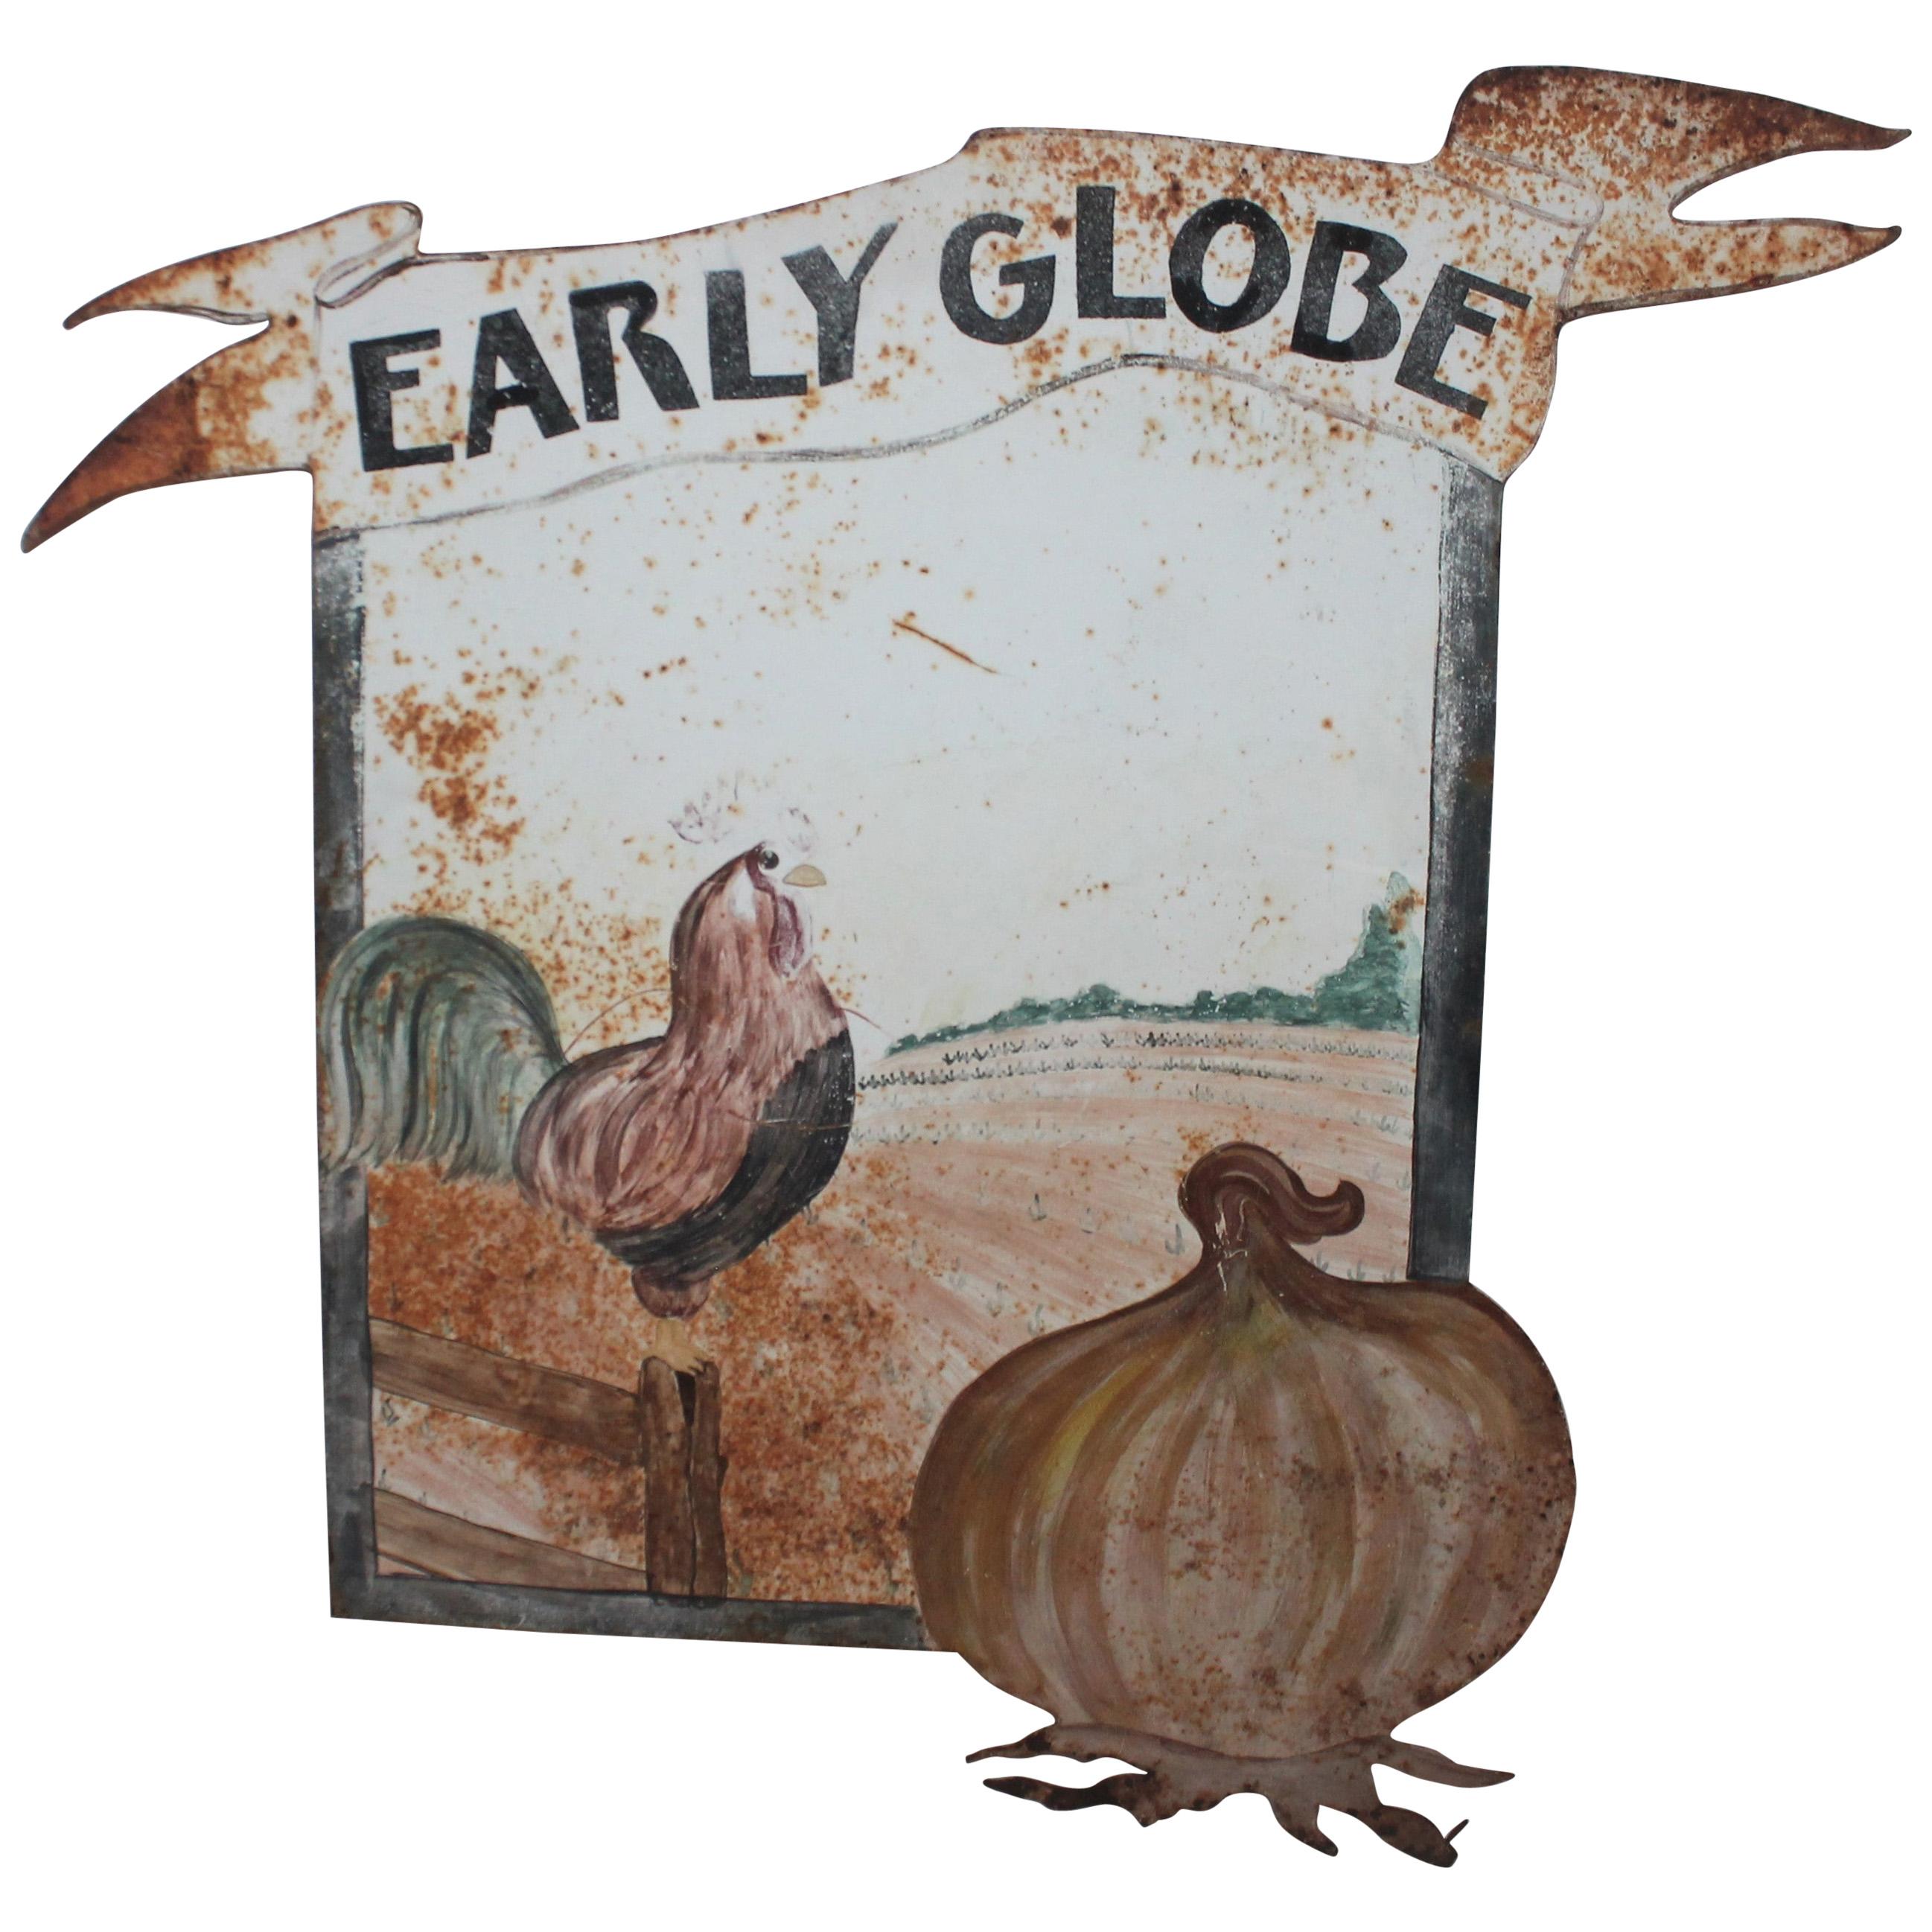 Original Painted Sheet Iron Trade Sign "Early Globe" from a Onion Farm